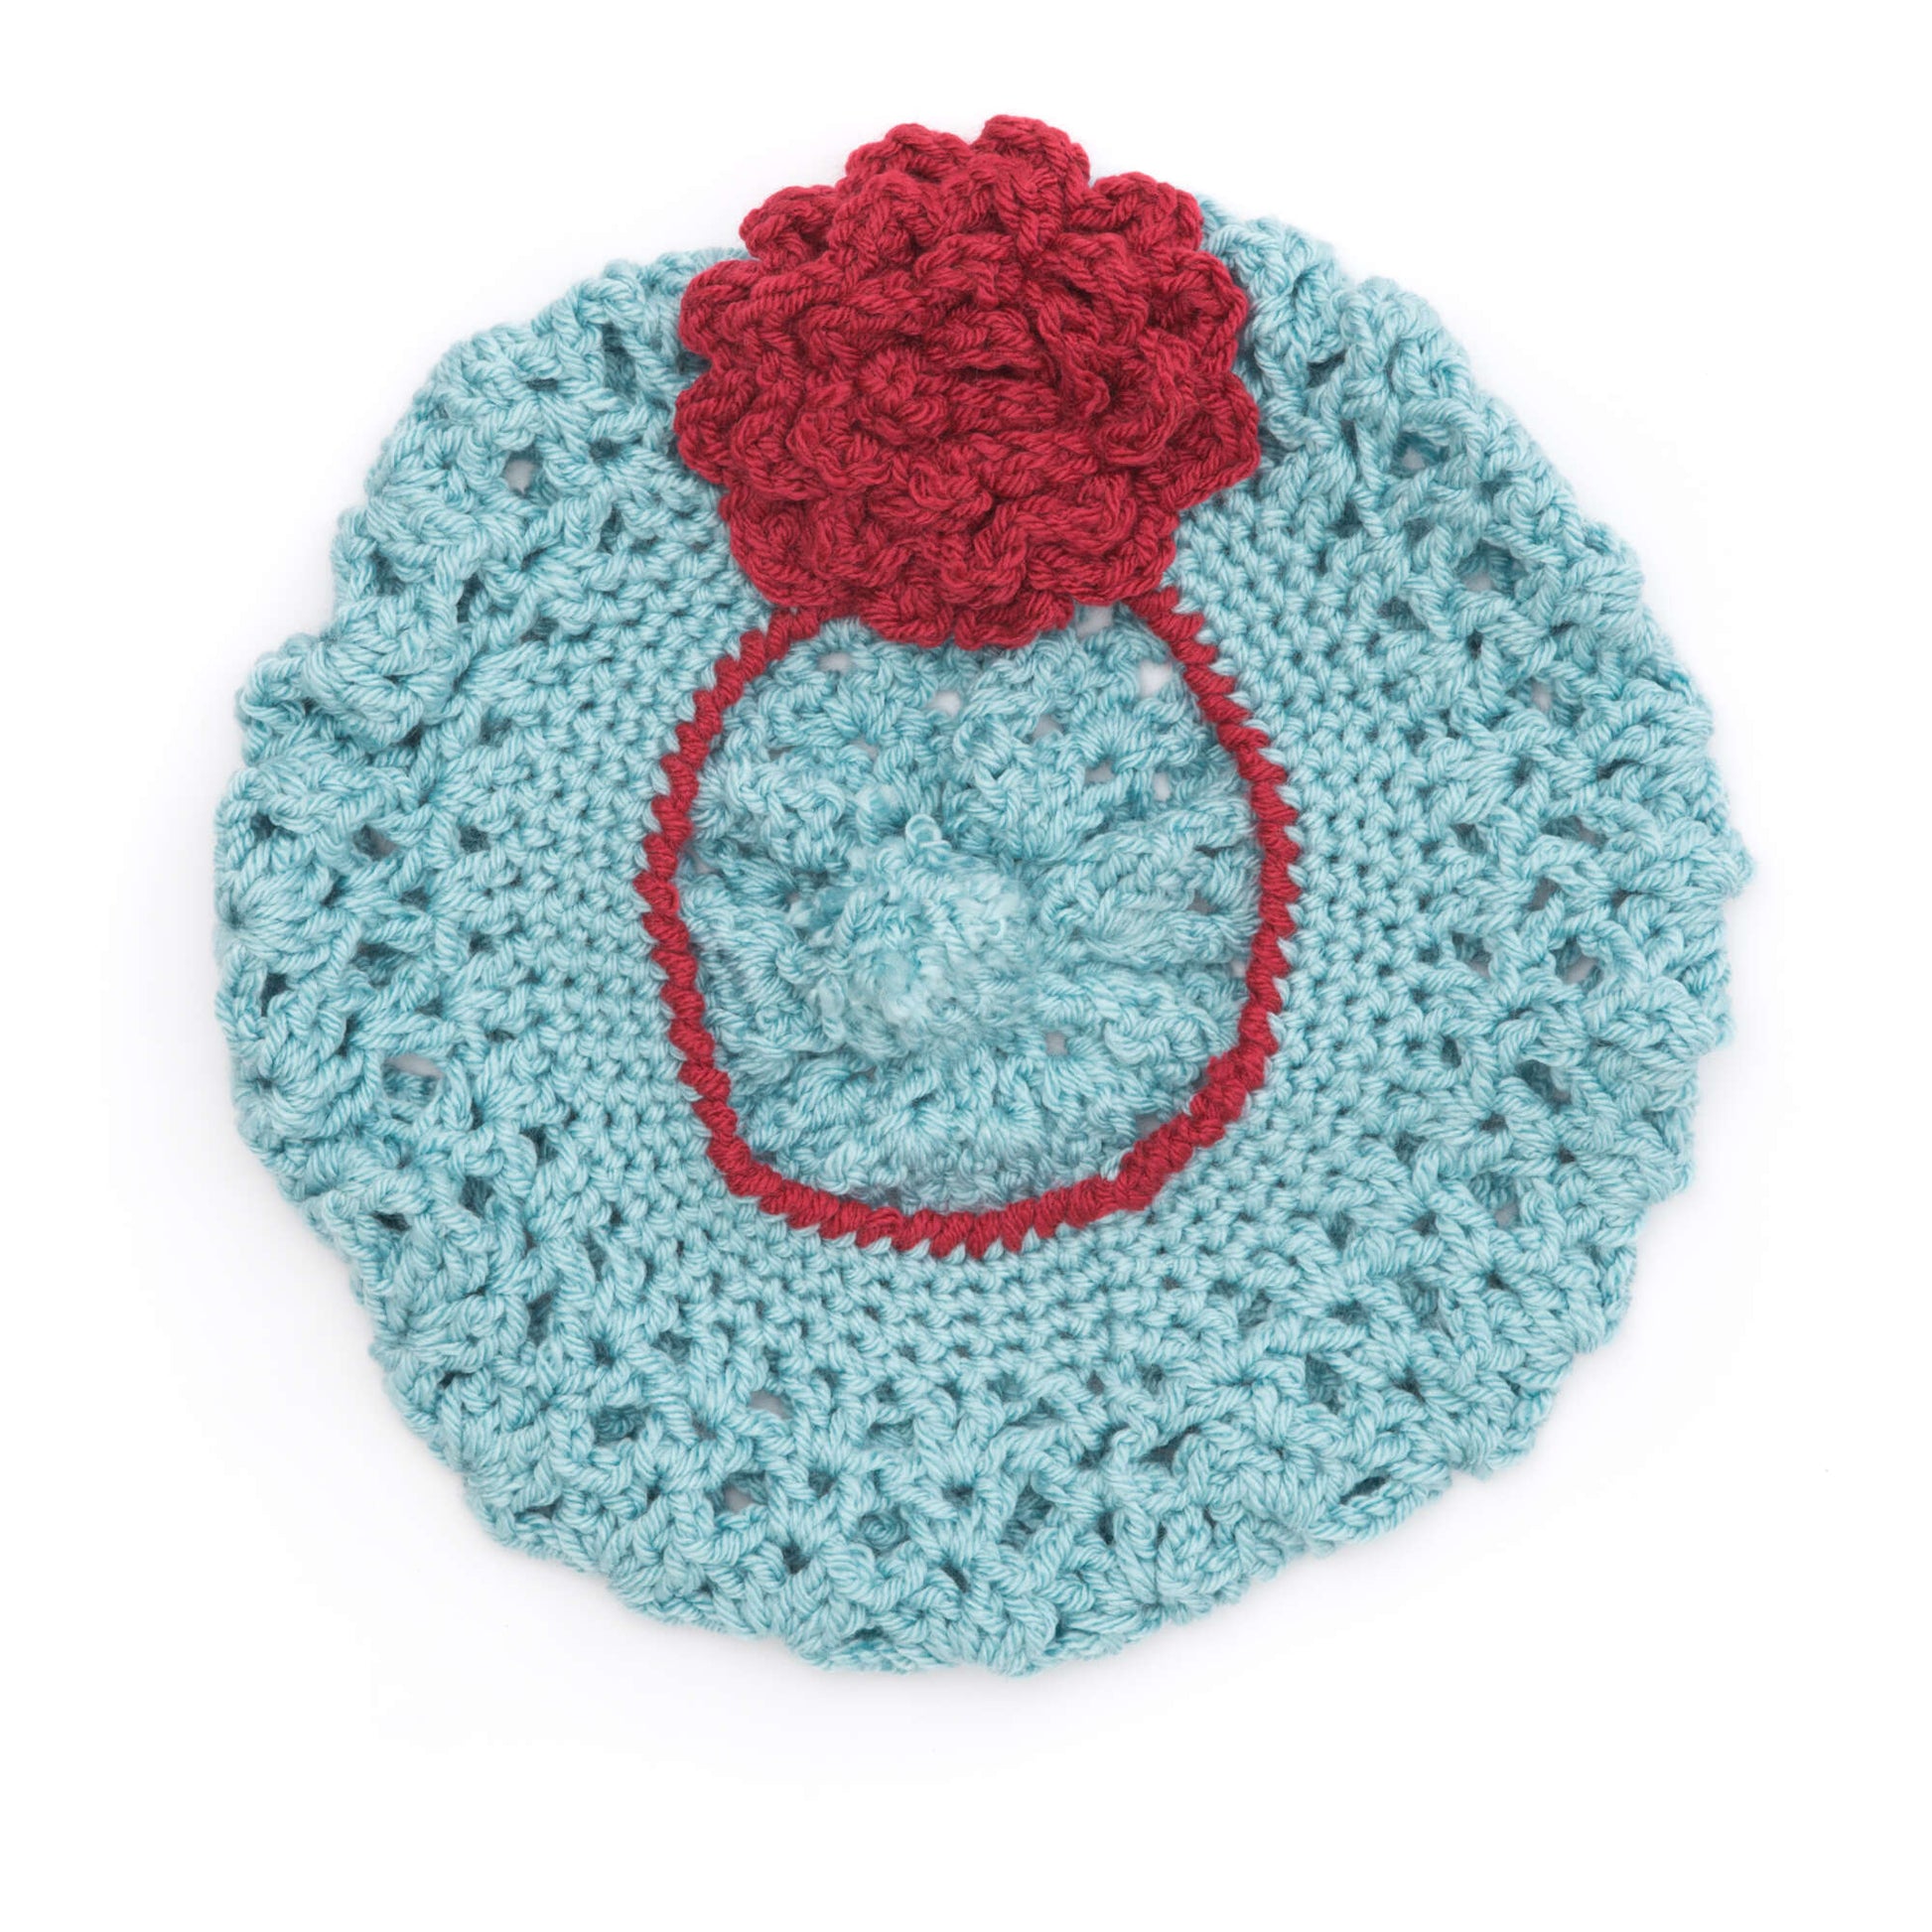 Free Patons Awesome Blossom Hat Crochet Pattern